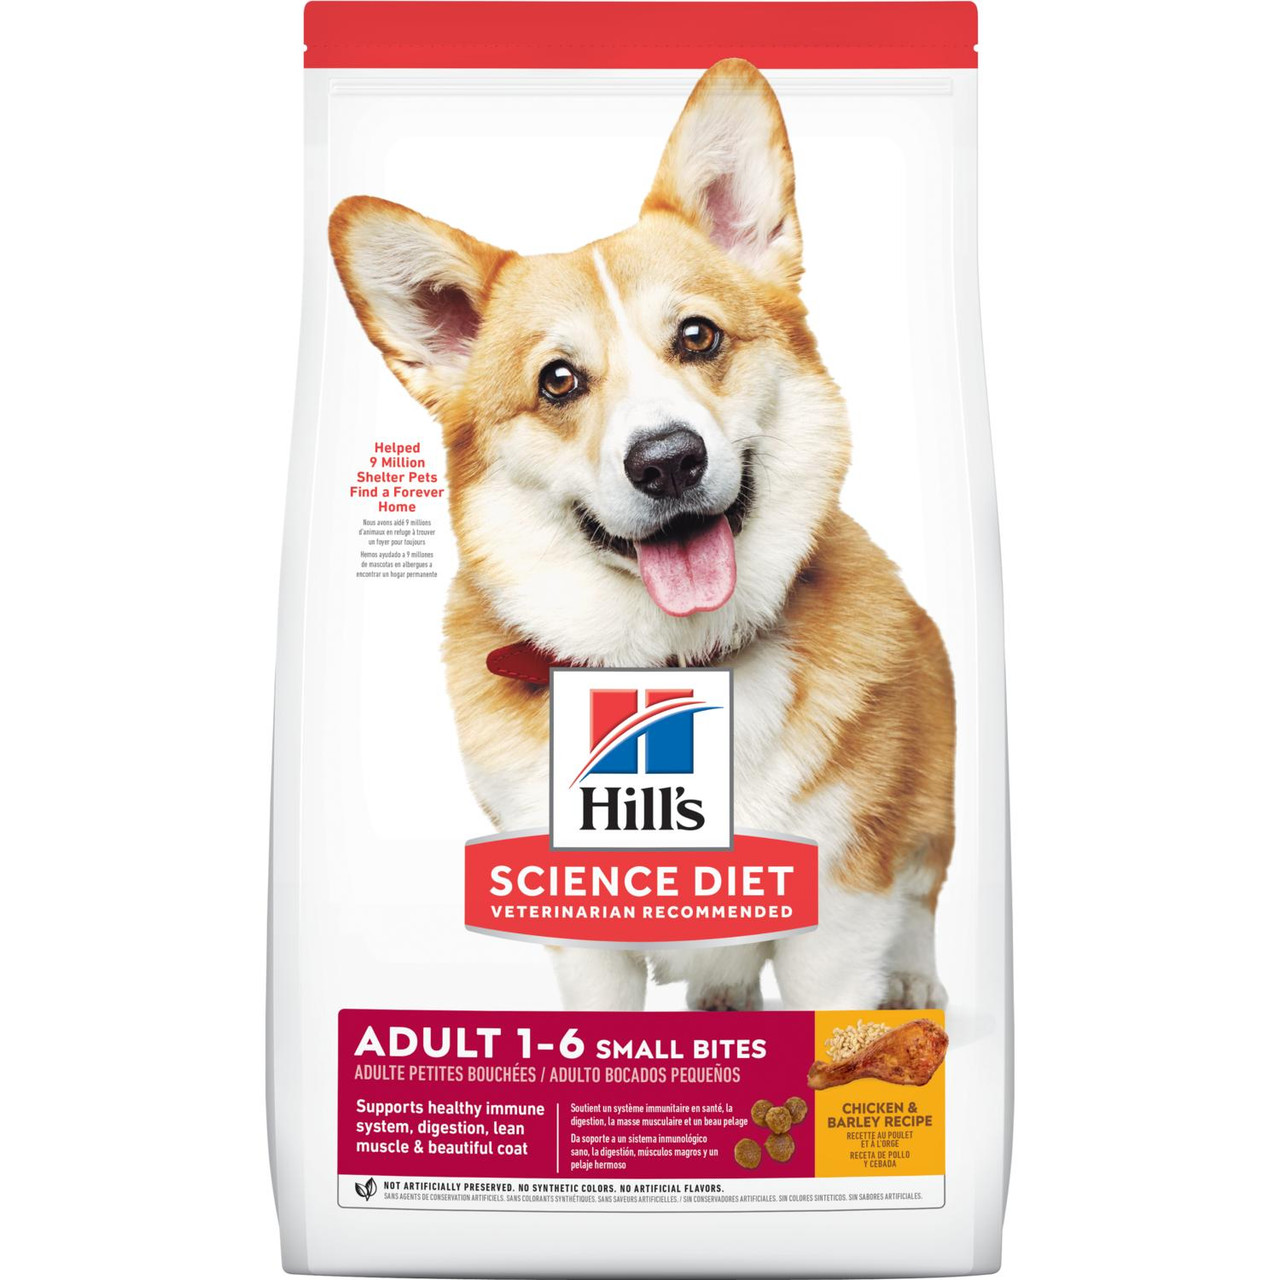 Hill's Science Diet Puppy Small Paws Dry Dog Food